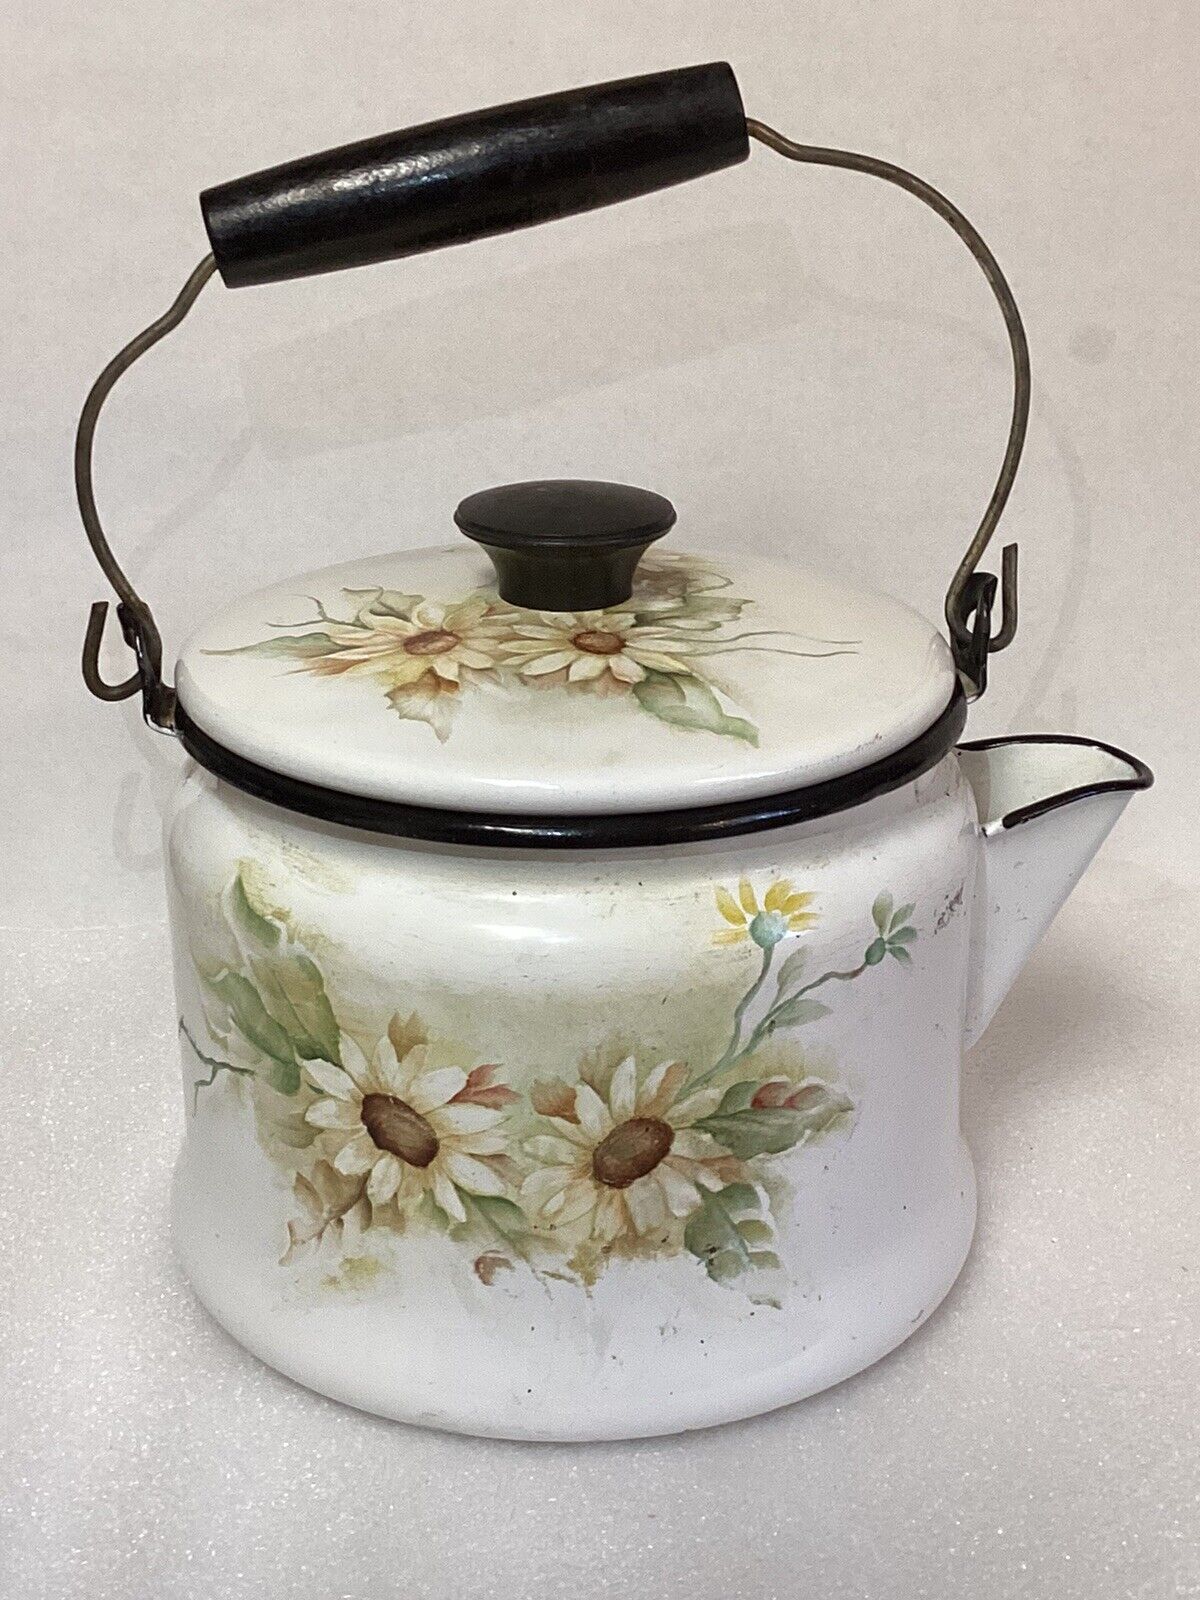 VTG Rustic Metal Kettle Pot With Wooden Handle 6.75 X 8.25 Yellow/ White Floral